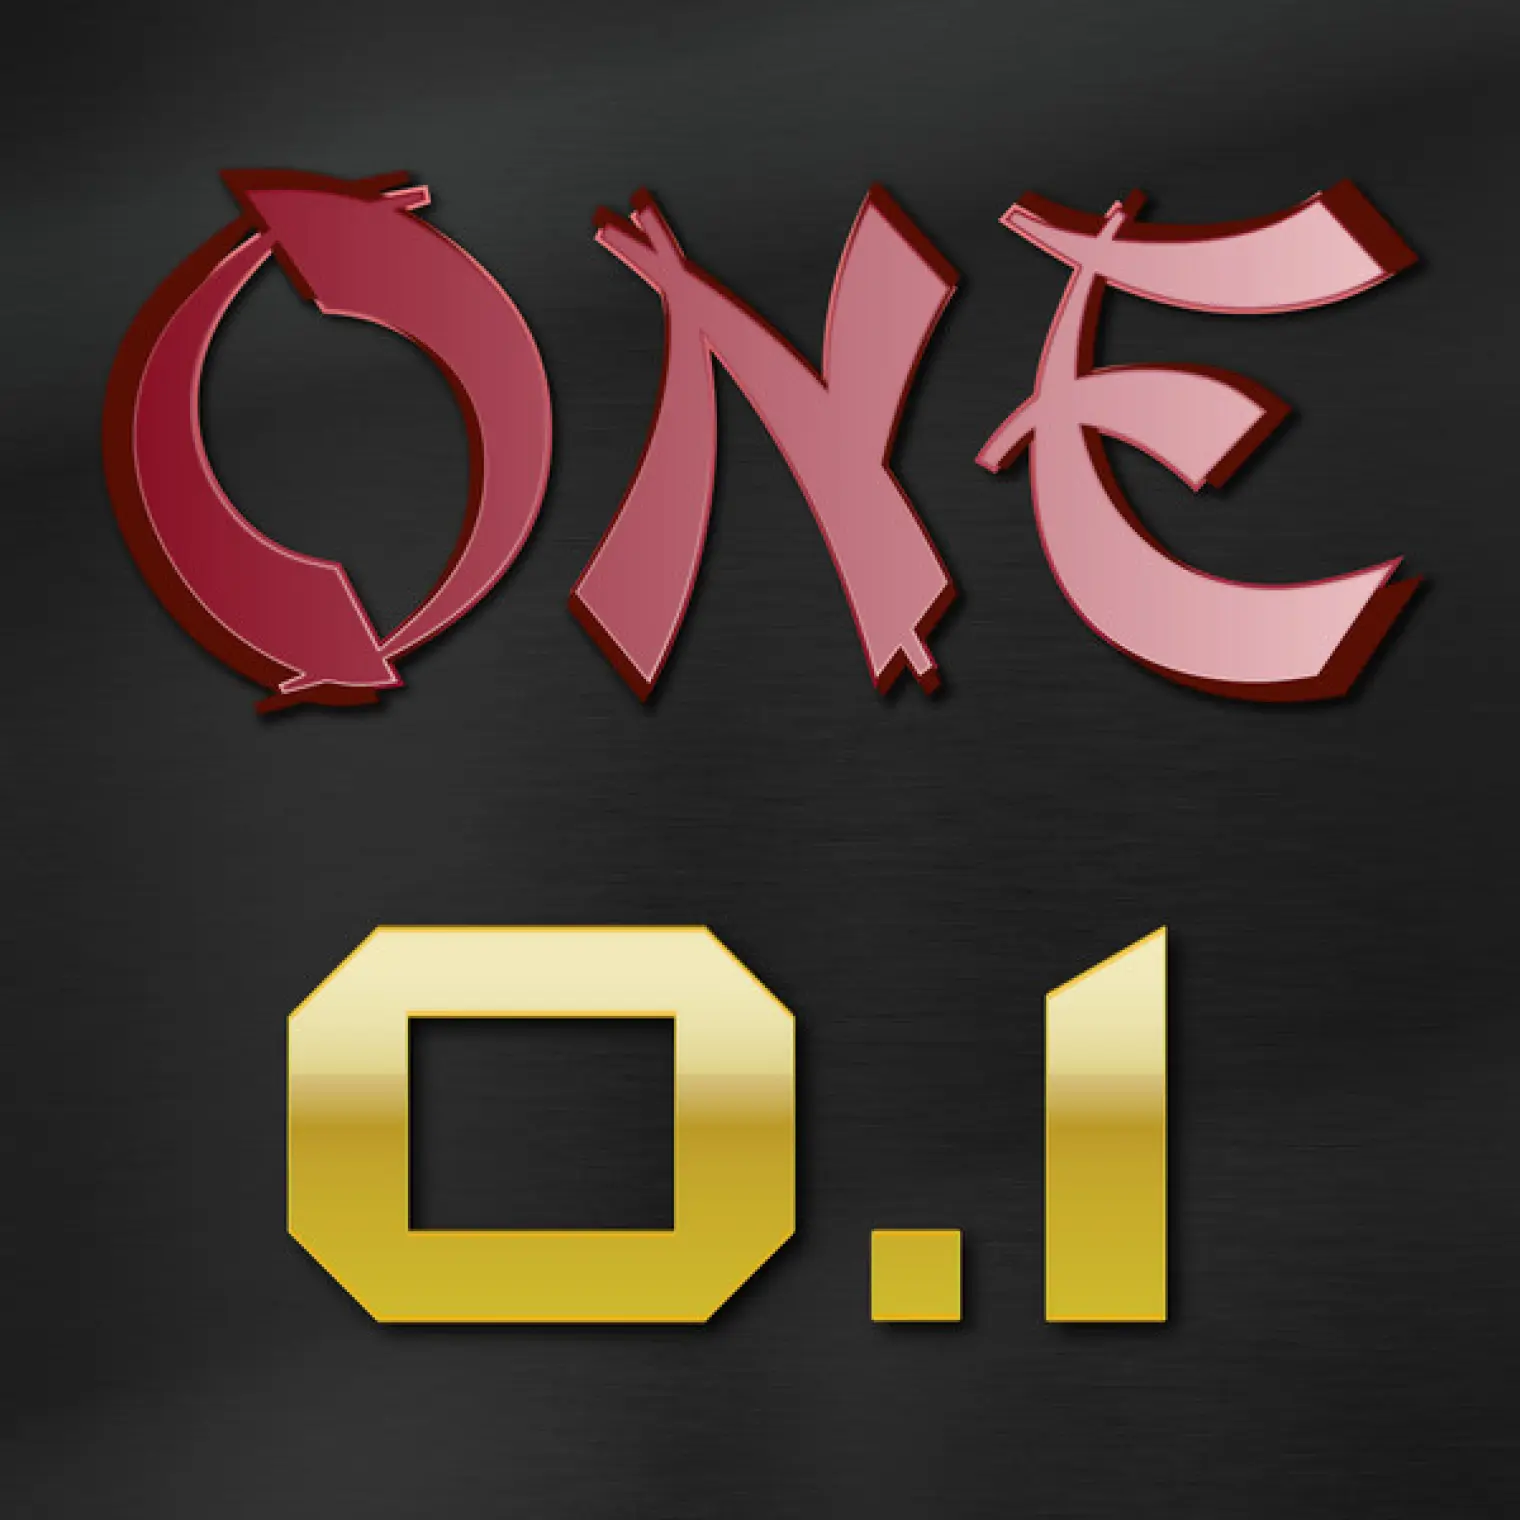 0.1 -  One 